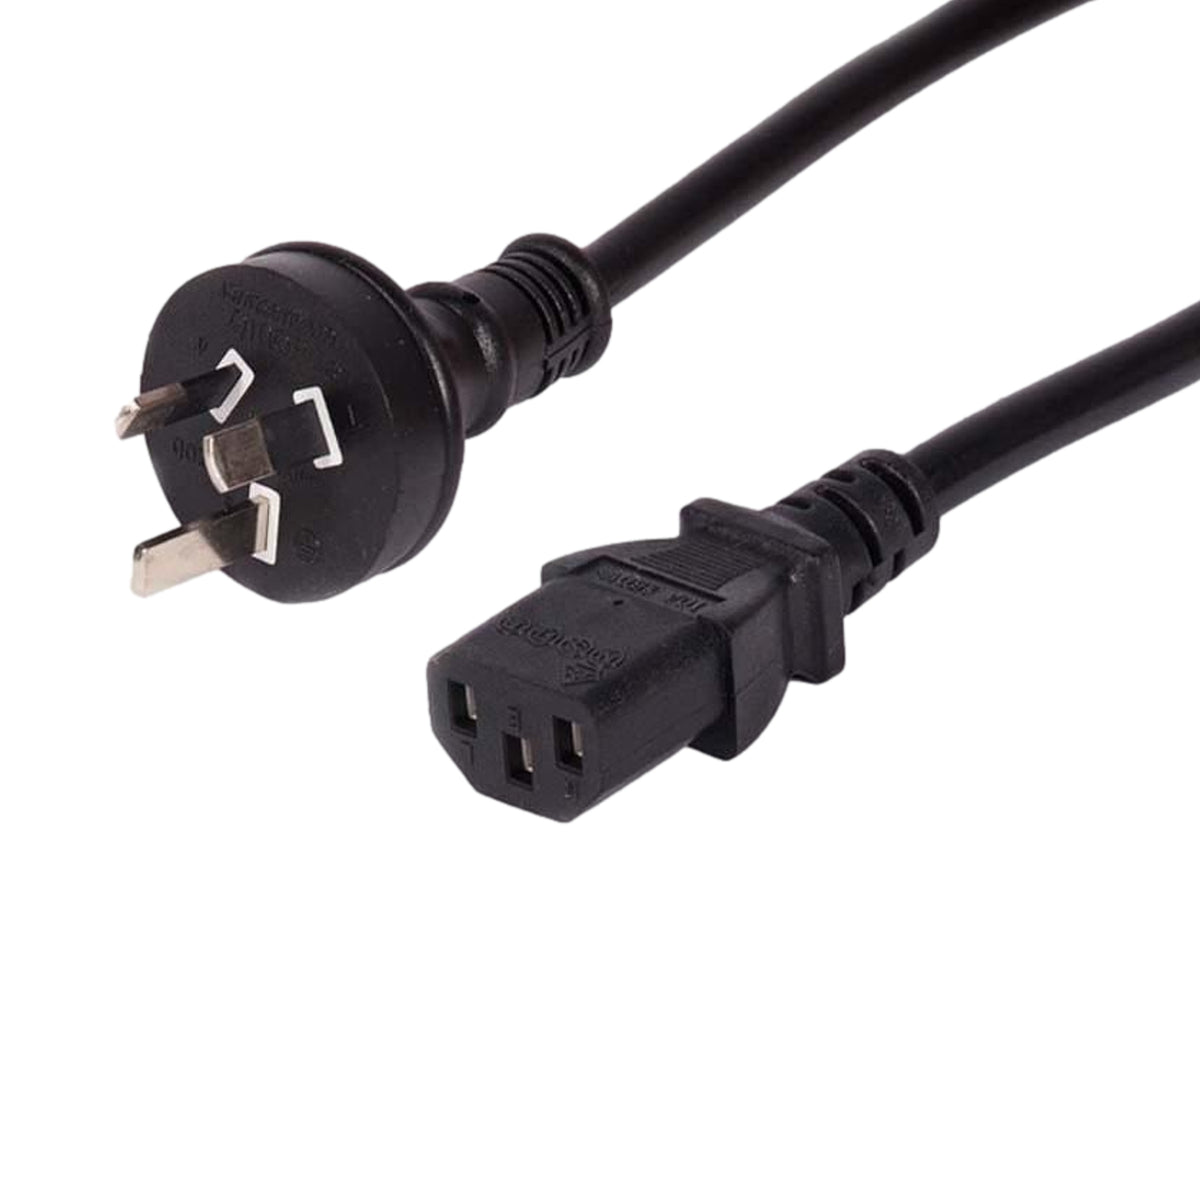 10 Amp AC Power Cable 2m